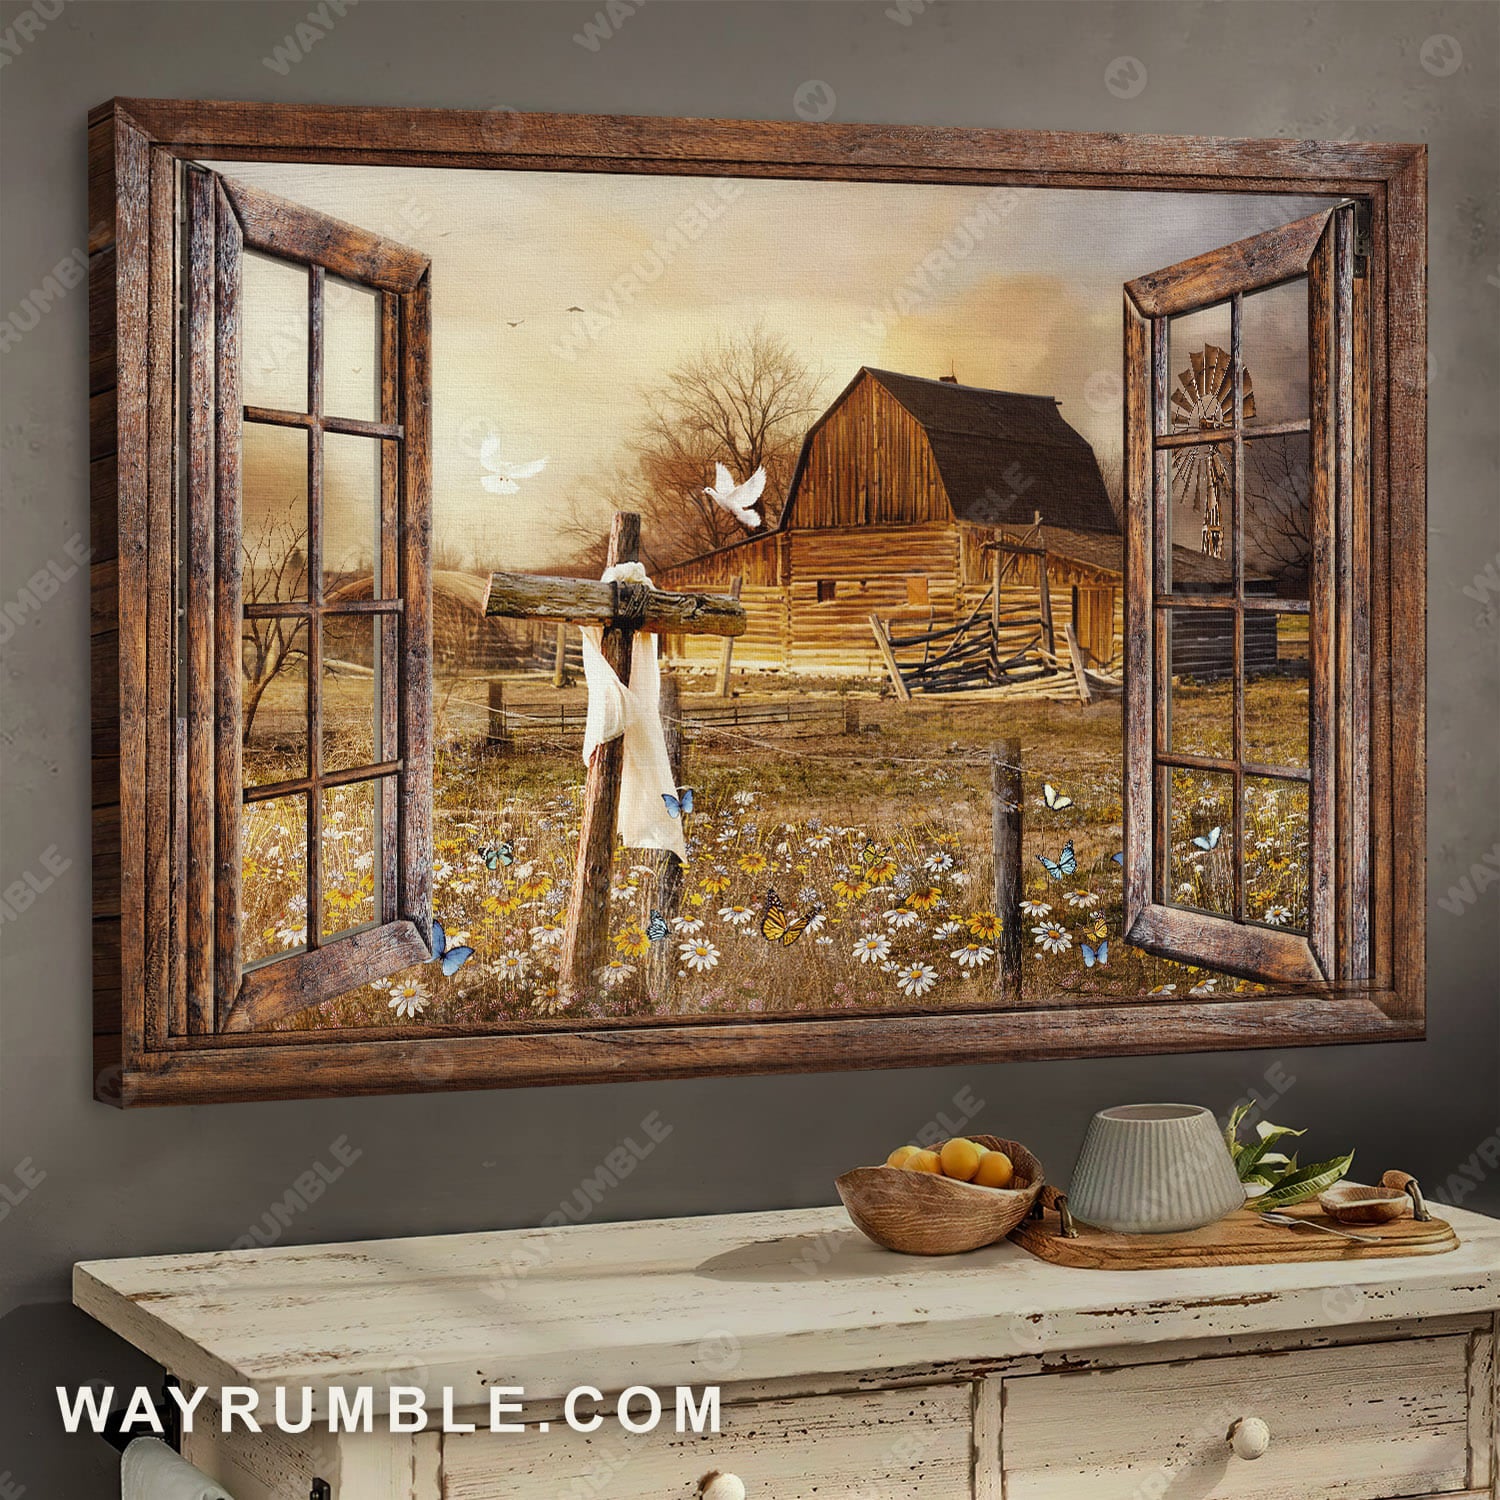 Countryside landscape, Old barn painting, Wooden cross, The beautiful sunset - Jesus Landscape Canvas Prints, Wall Art